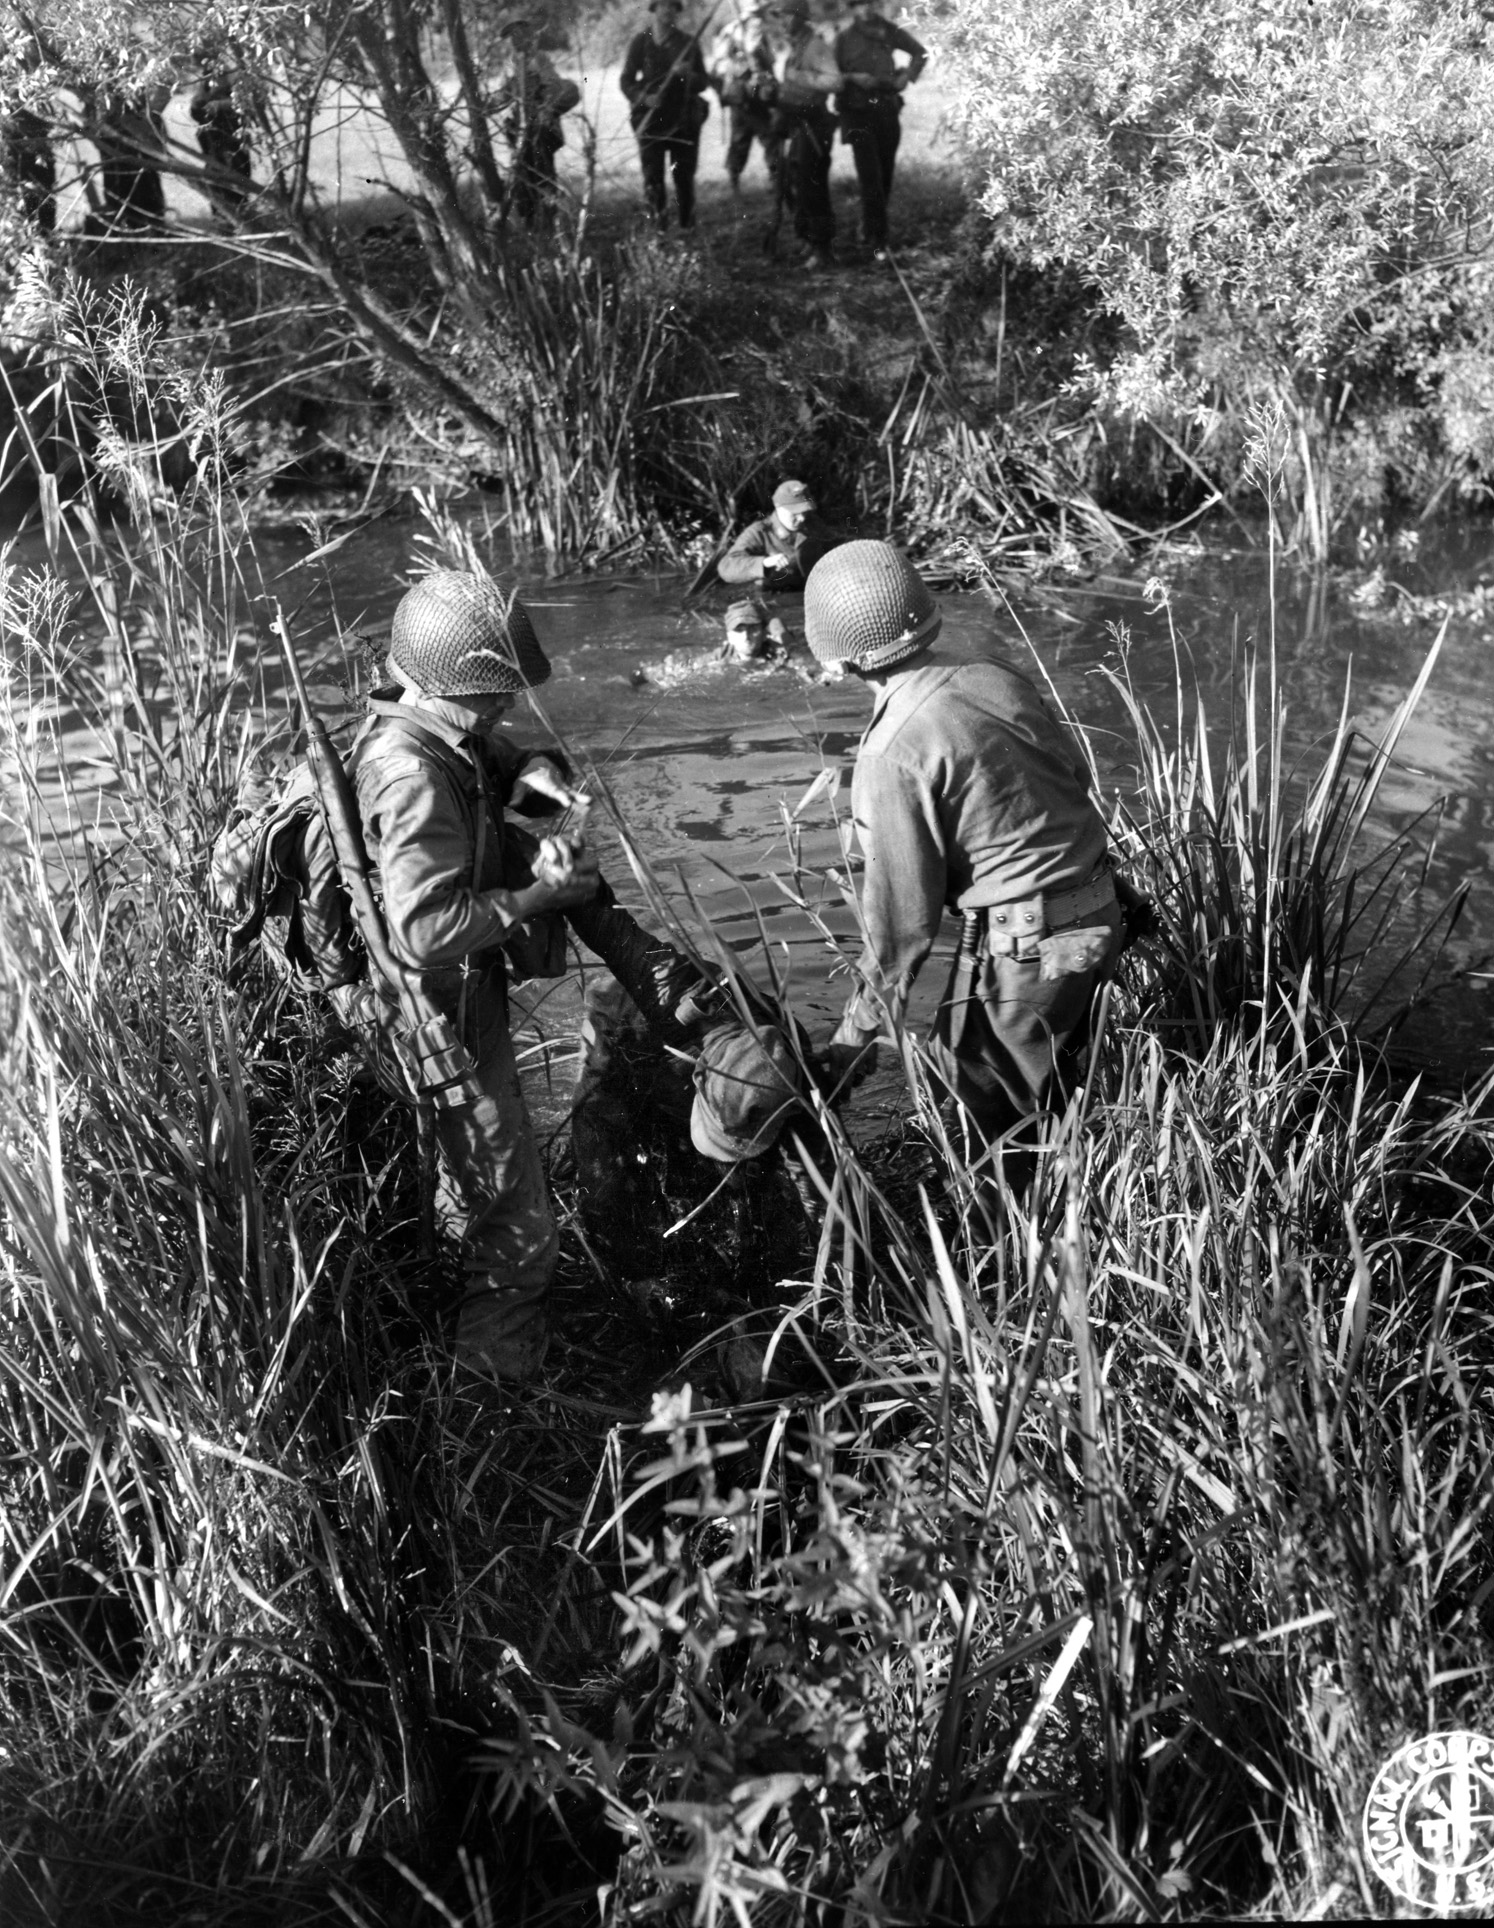 A surrendering German slogs his way out of a creek. After the battle, German soldiers attempted to escape the area in small groups, which led to scattered firefights.